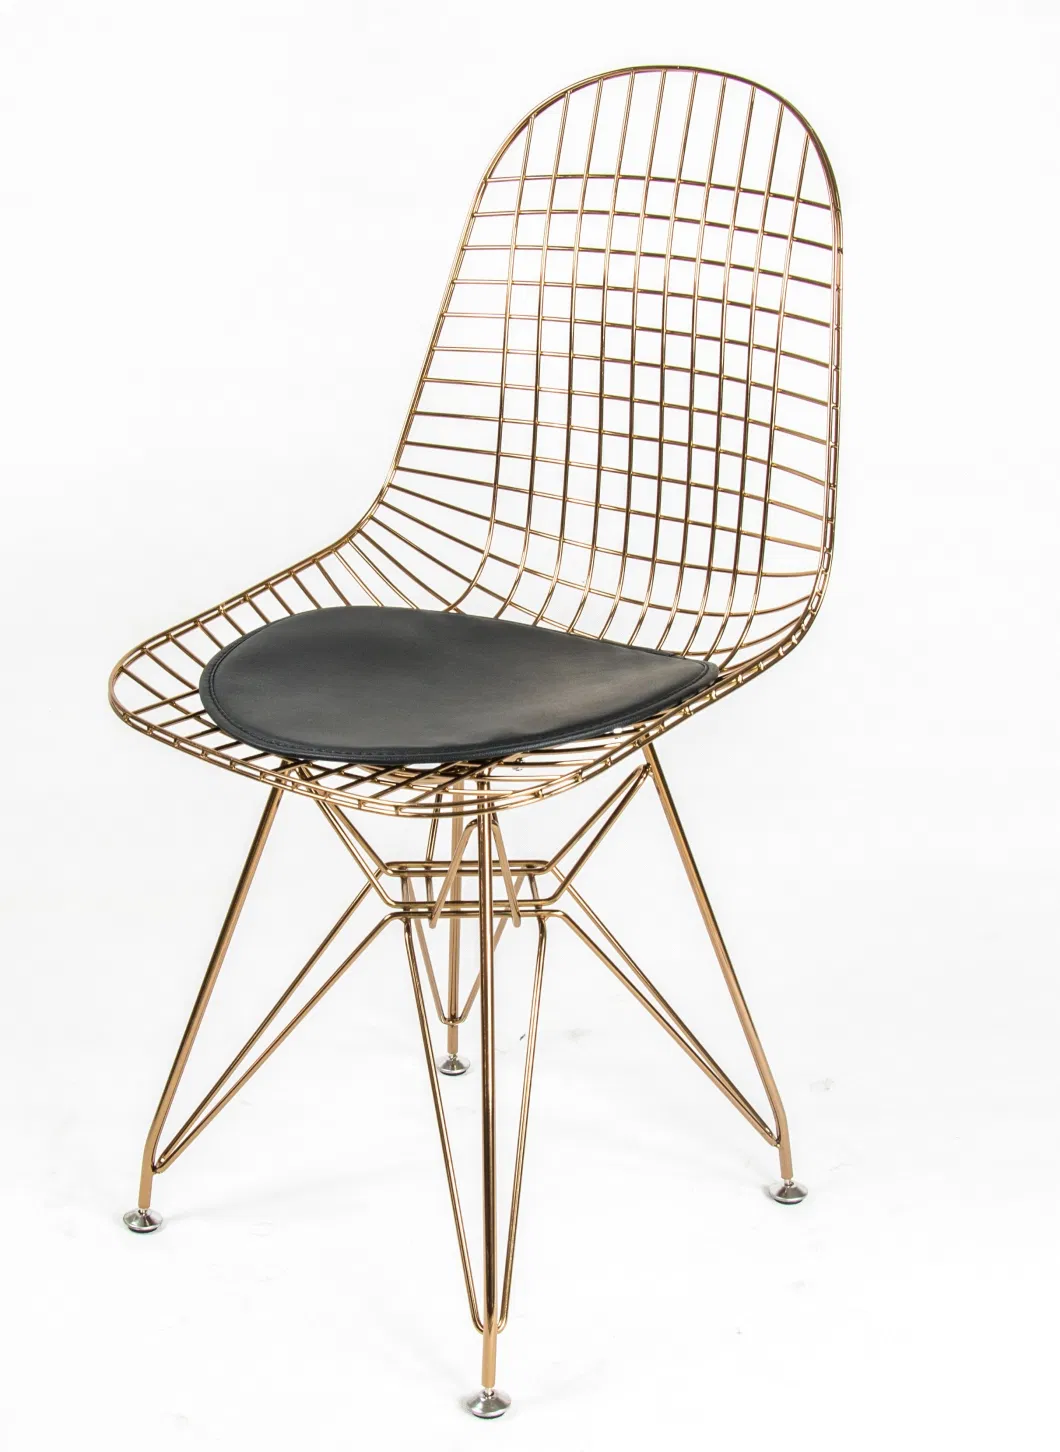 China Quality Furniture Manufacturer of Quality Welded Steel Wire Dining Chair